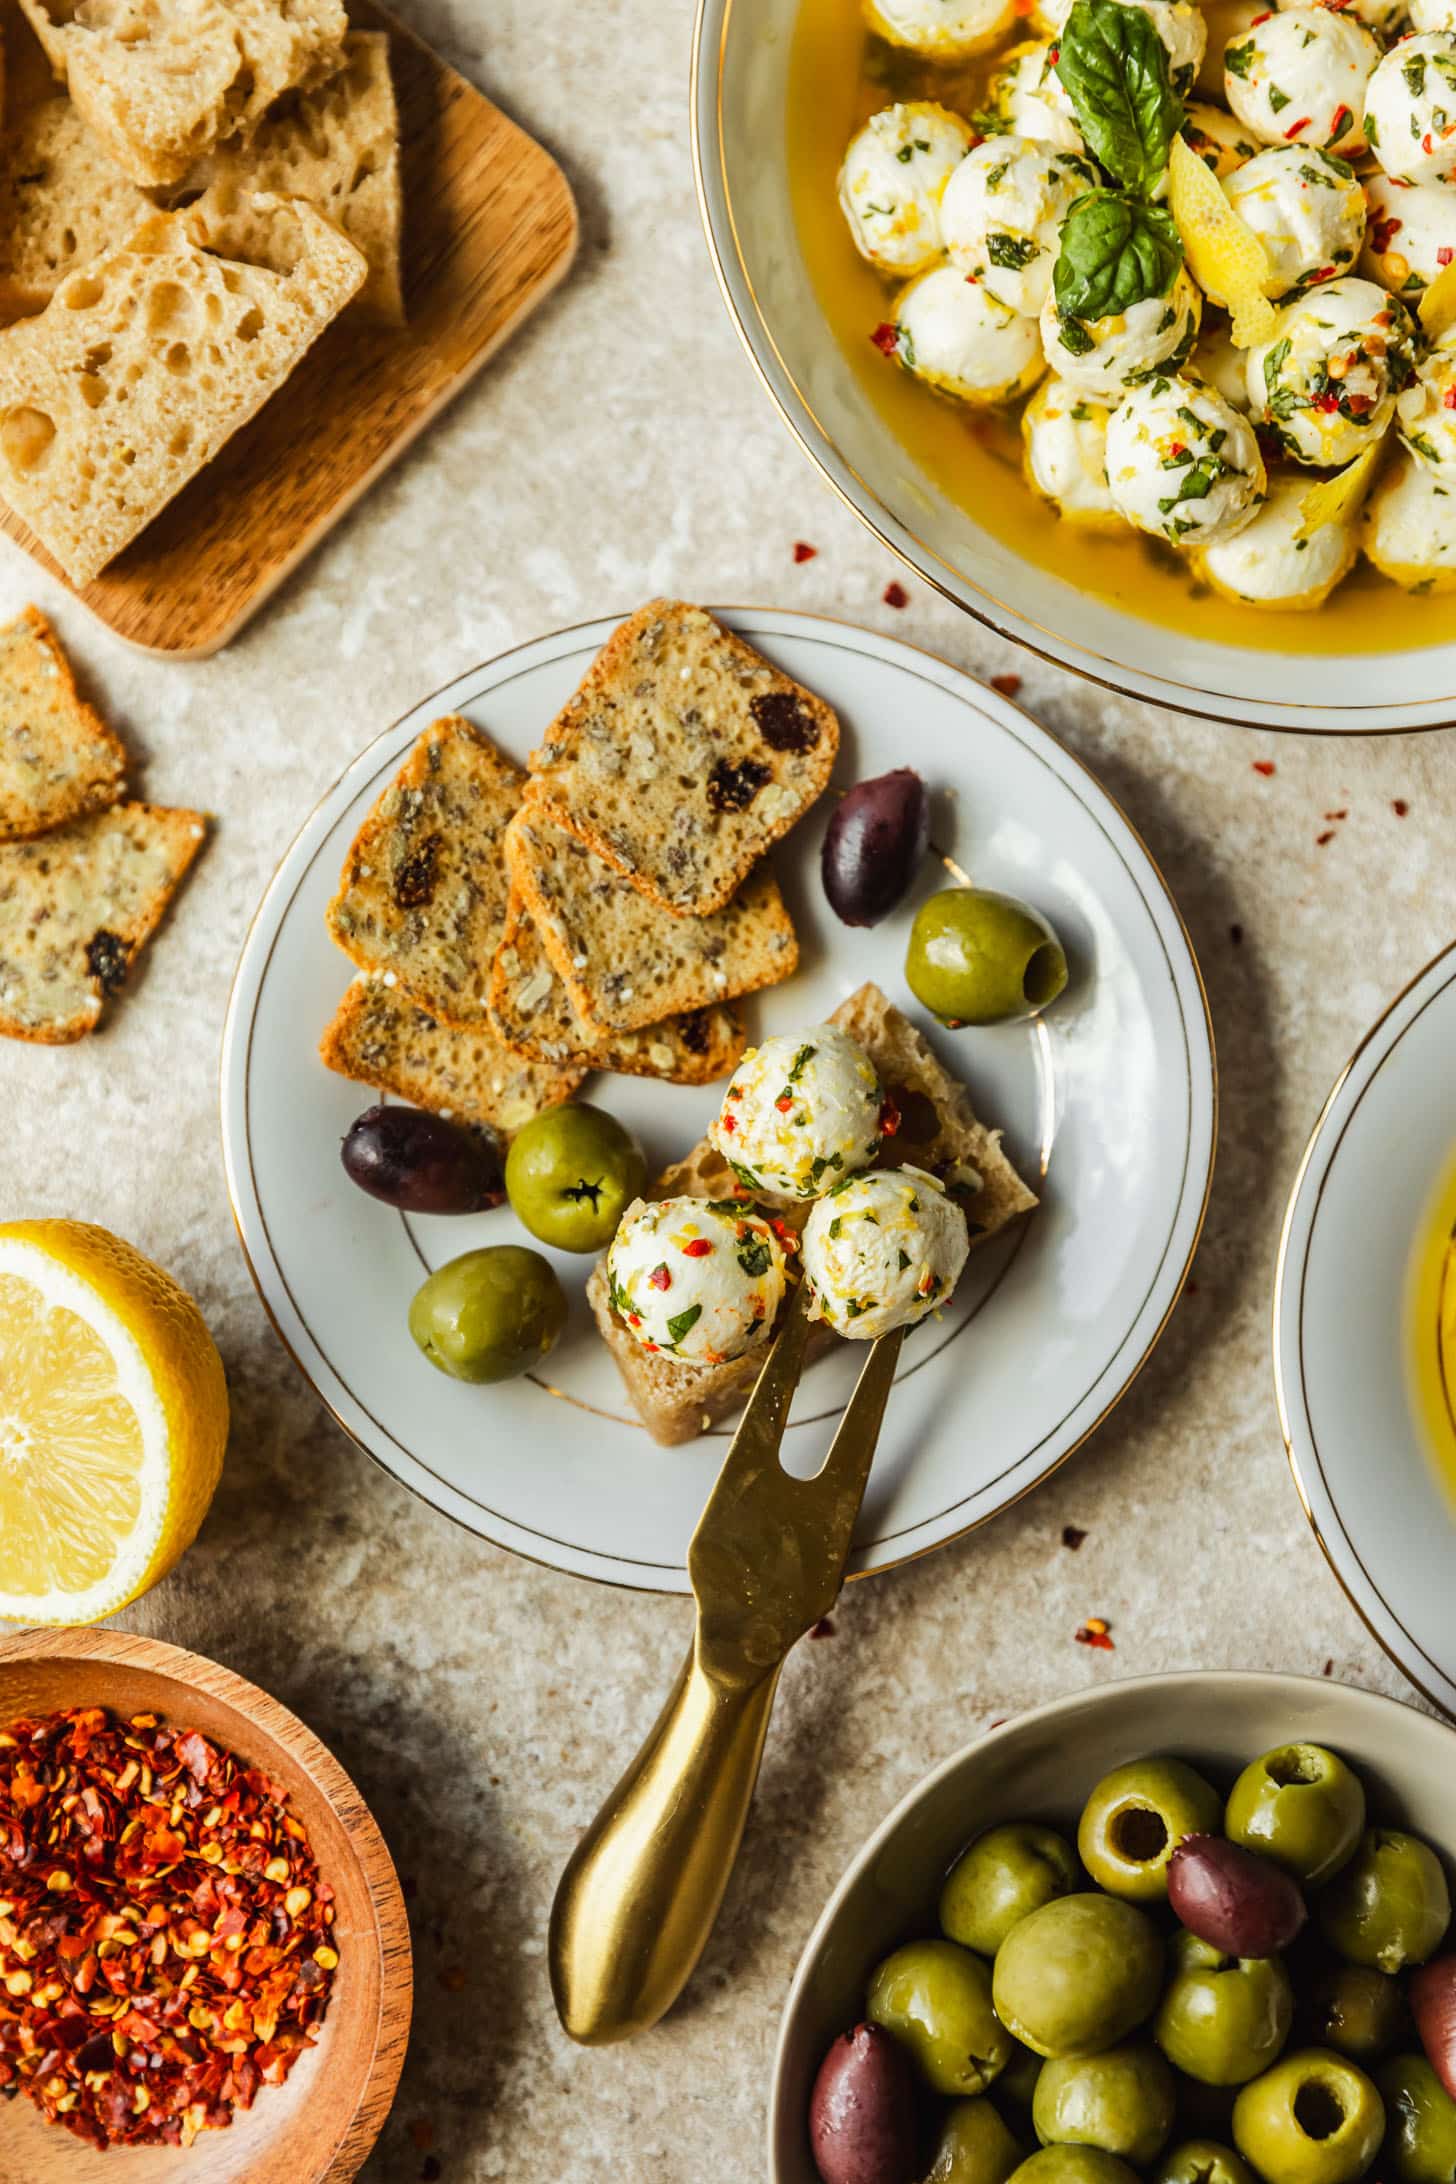 A white plate with crackers, marinated mozzarella balls, olives, and a gold cheese fork on a tan counter next to a white bowl of marinated mozzarella balls, crackers, a grey bowl of olives, a wood bowl of red pepper flakes, and a halved lemon.